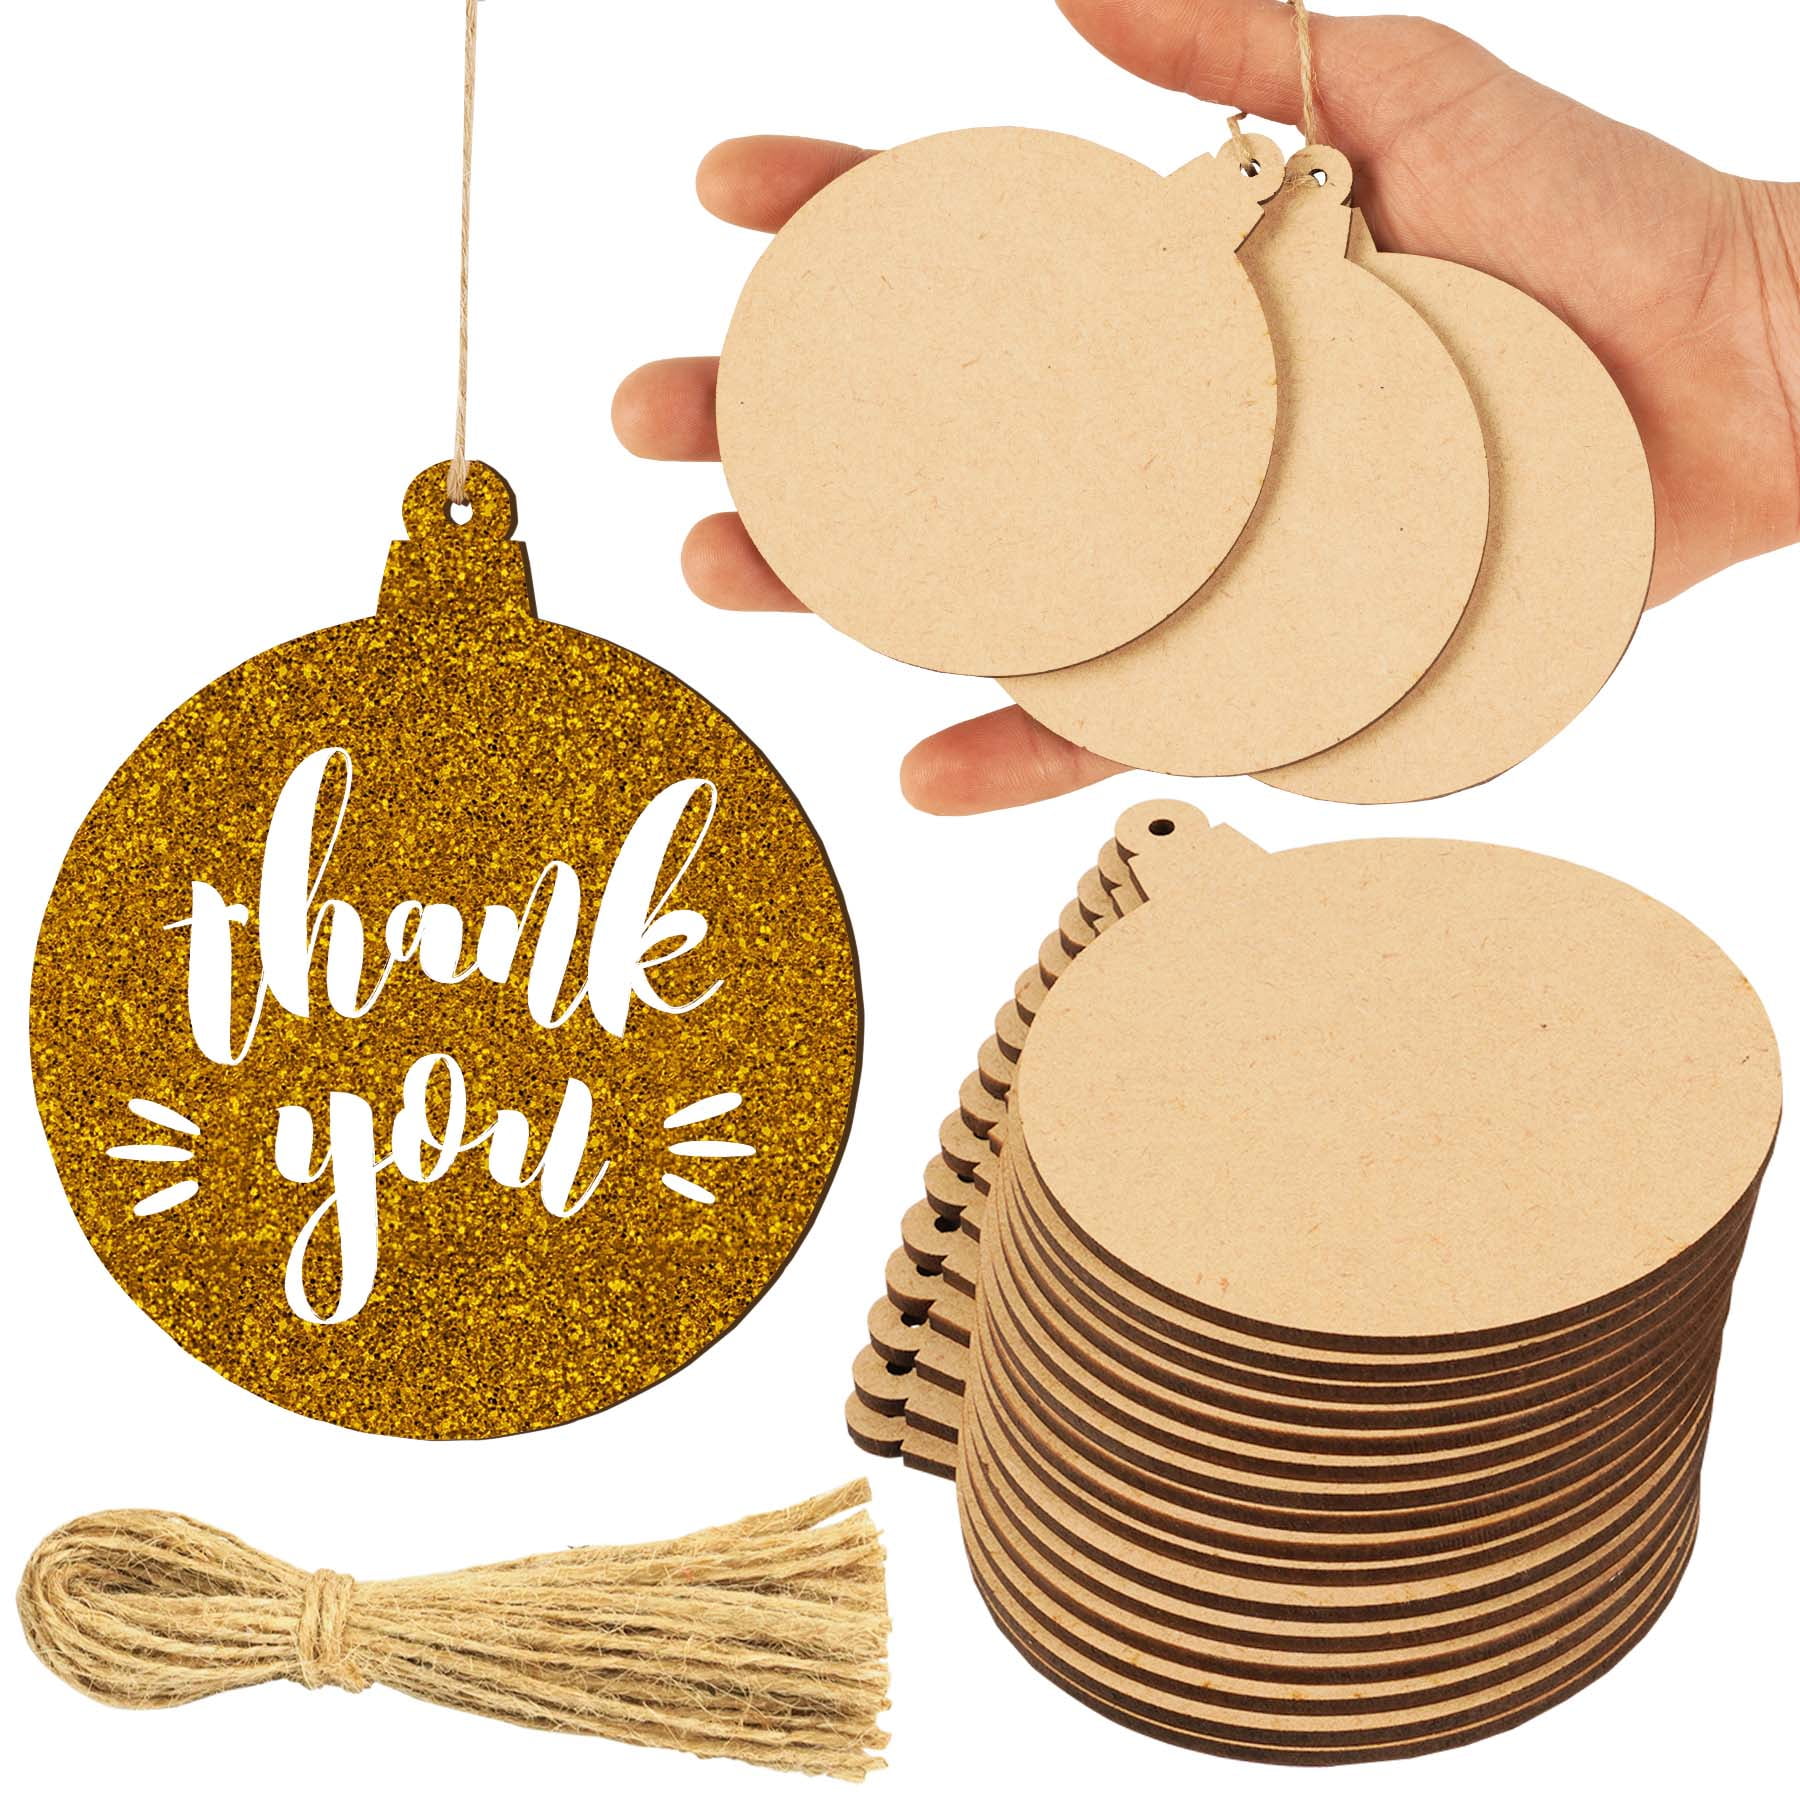 Wooden Christmas Ornaments DIY Round Unfinished Wood Pieces Slices Scrafts for Kids Tree Decoration Christmas Craft Supplies 40Pcs 3 Predrilled with Hole Blanks Discs Bulk 